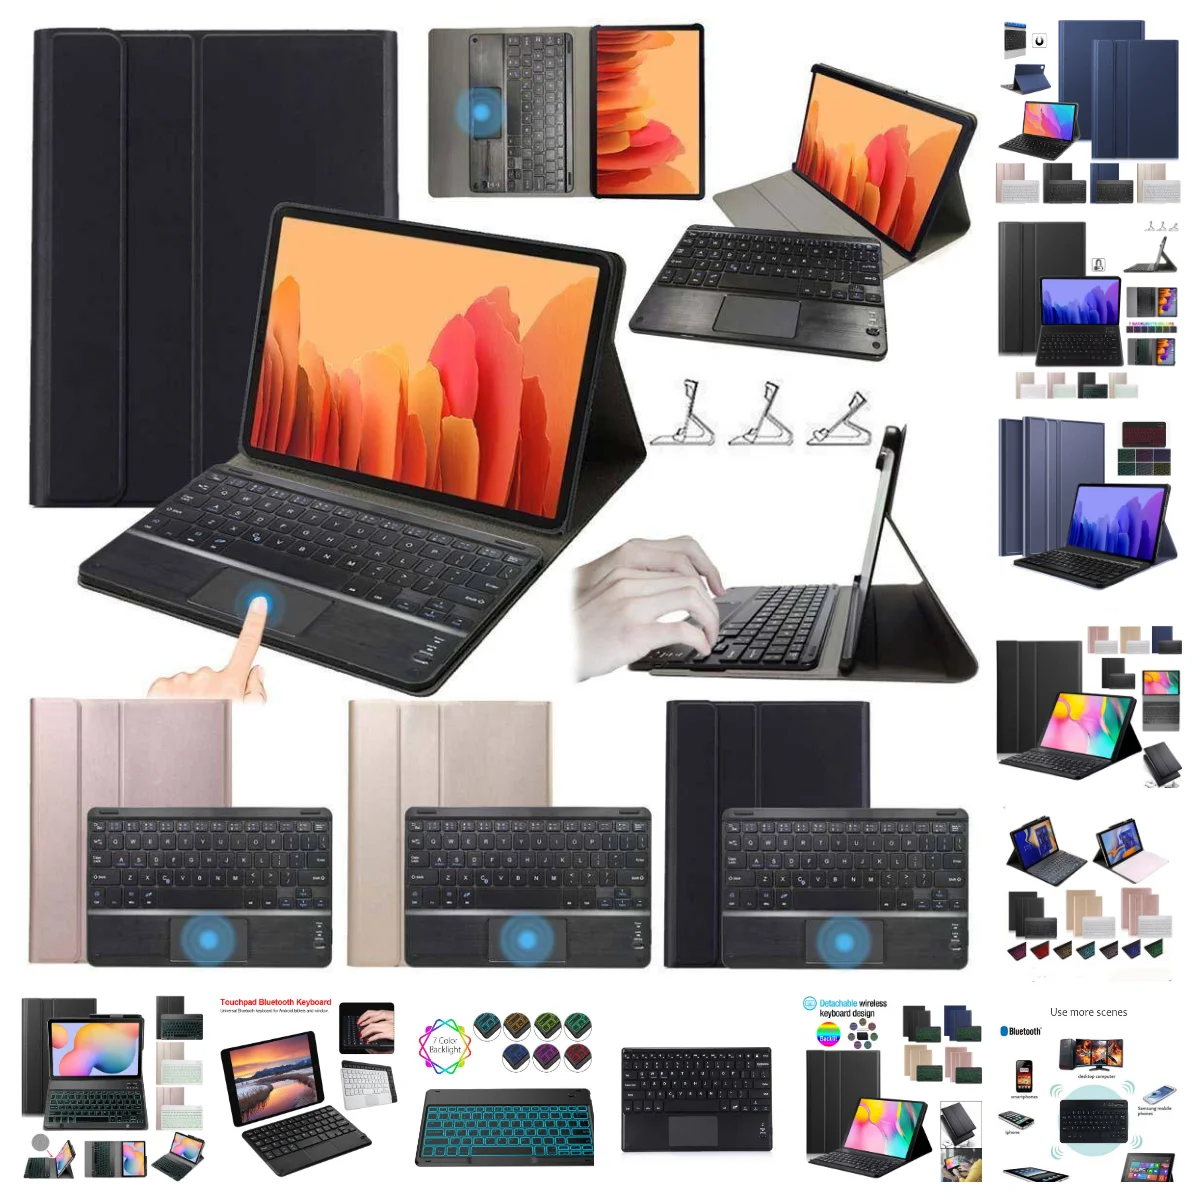 

Bluetooth Keyboard Case for Samsung Galaxy Tab A A6 10.1 2016 SM-T580 SM-T585 T580 T585 Tablet Cover Light Backlit Keyboard